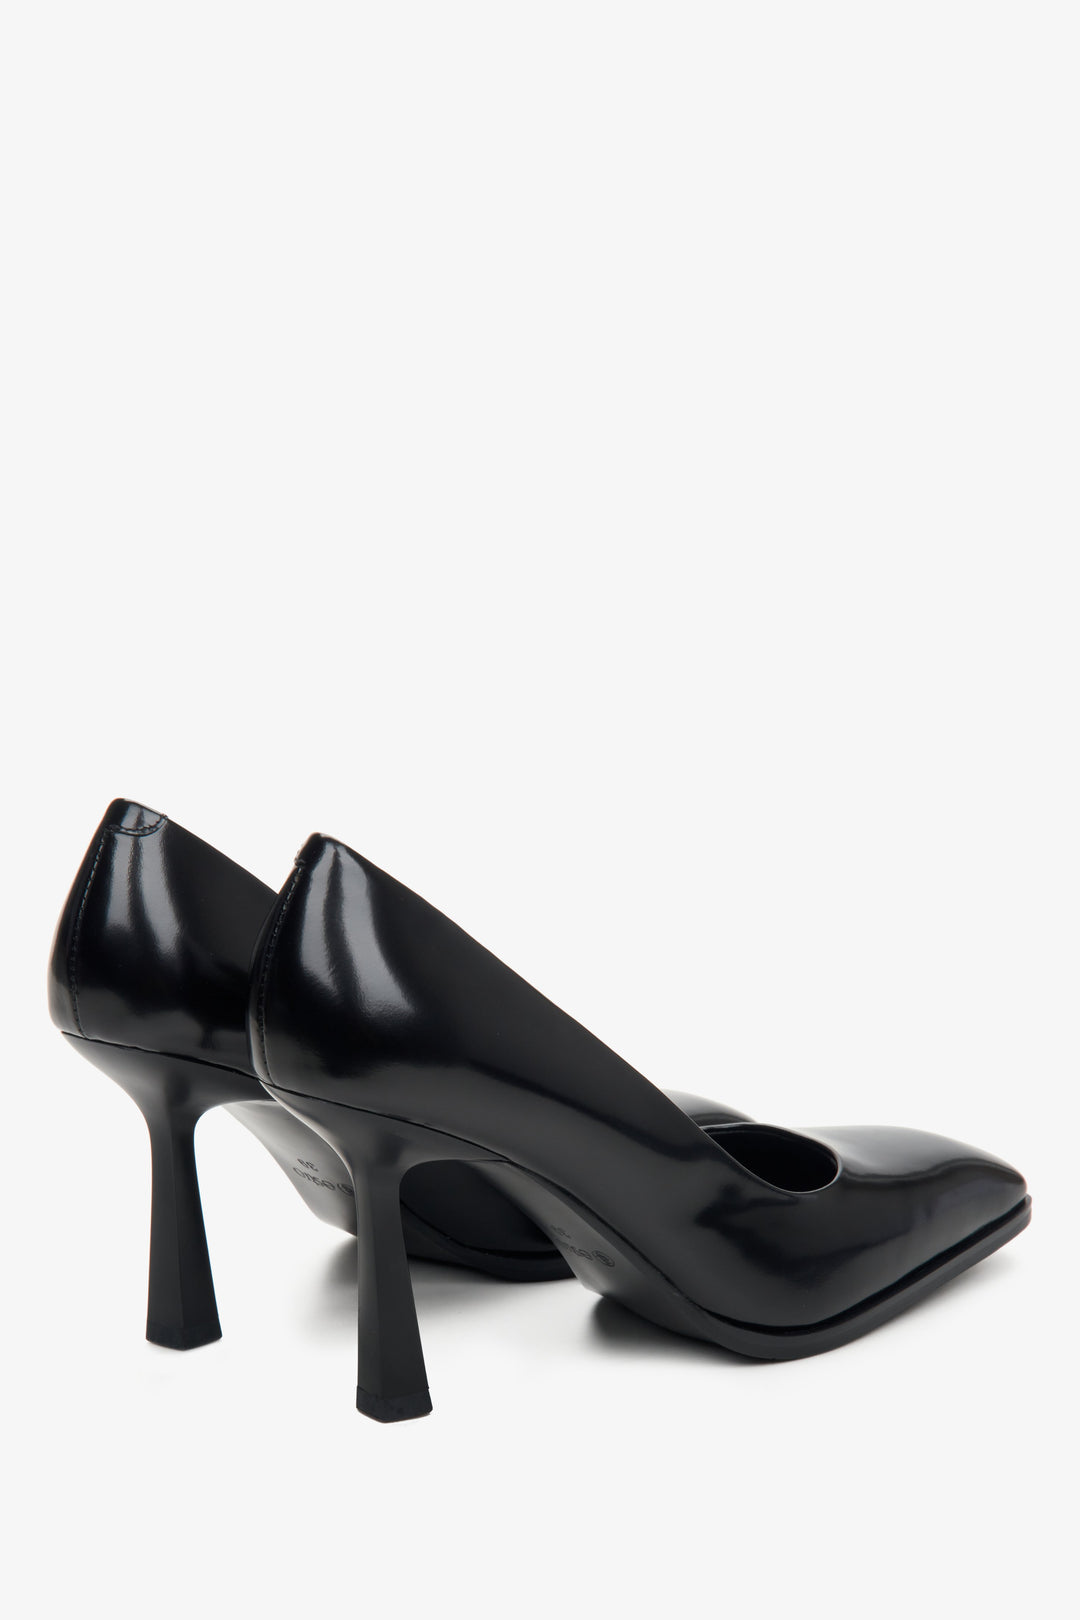 Black Estro women's leather shoes with heels - close-up on the heel and side line.